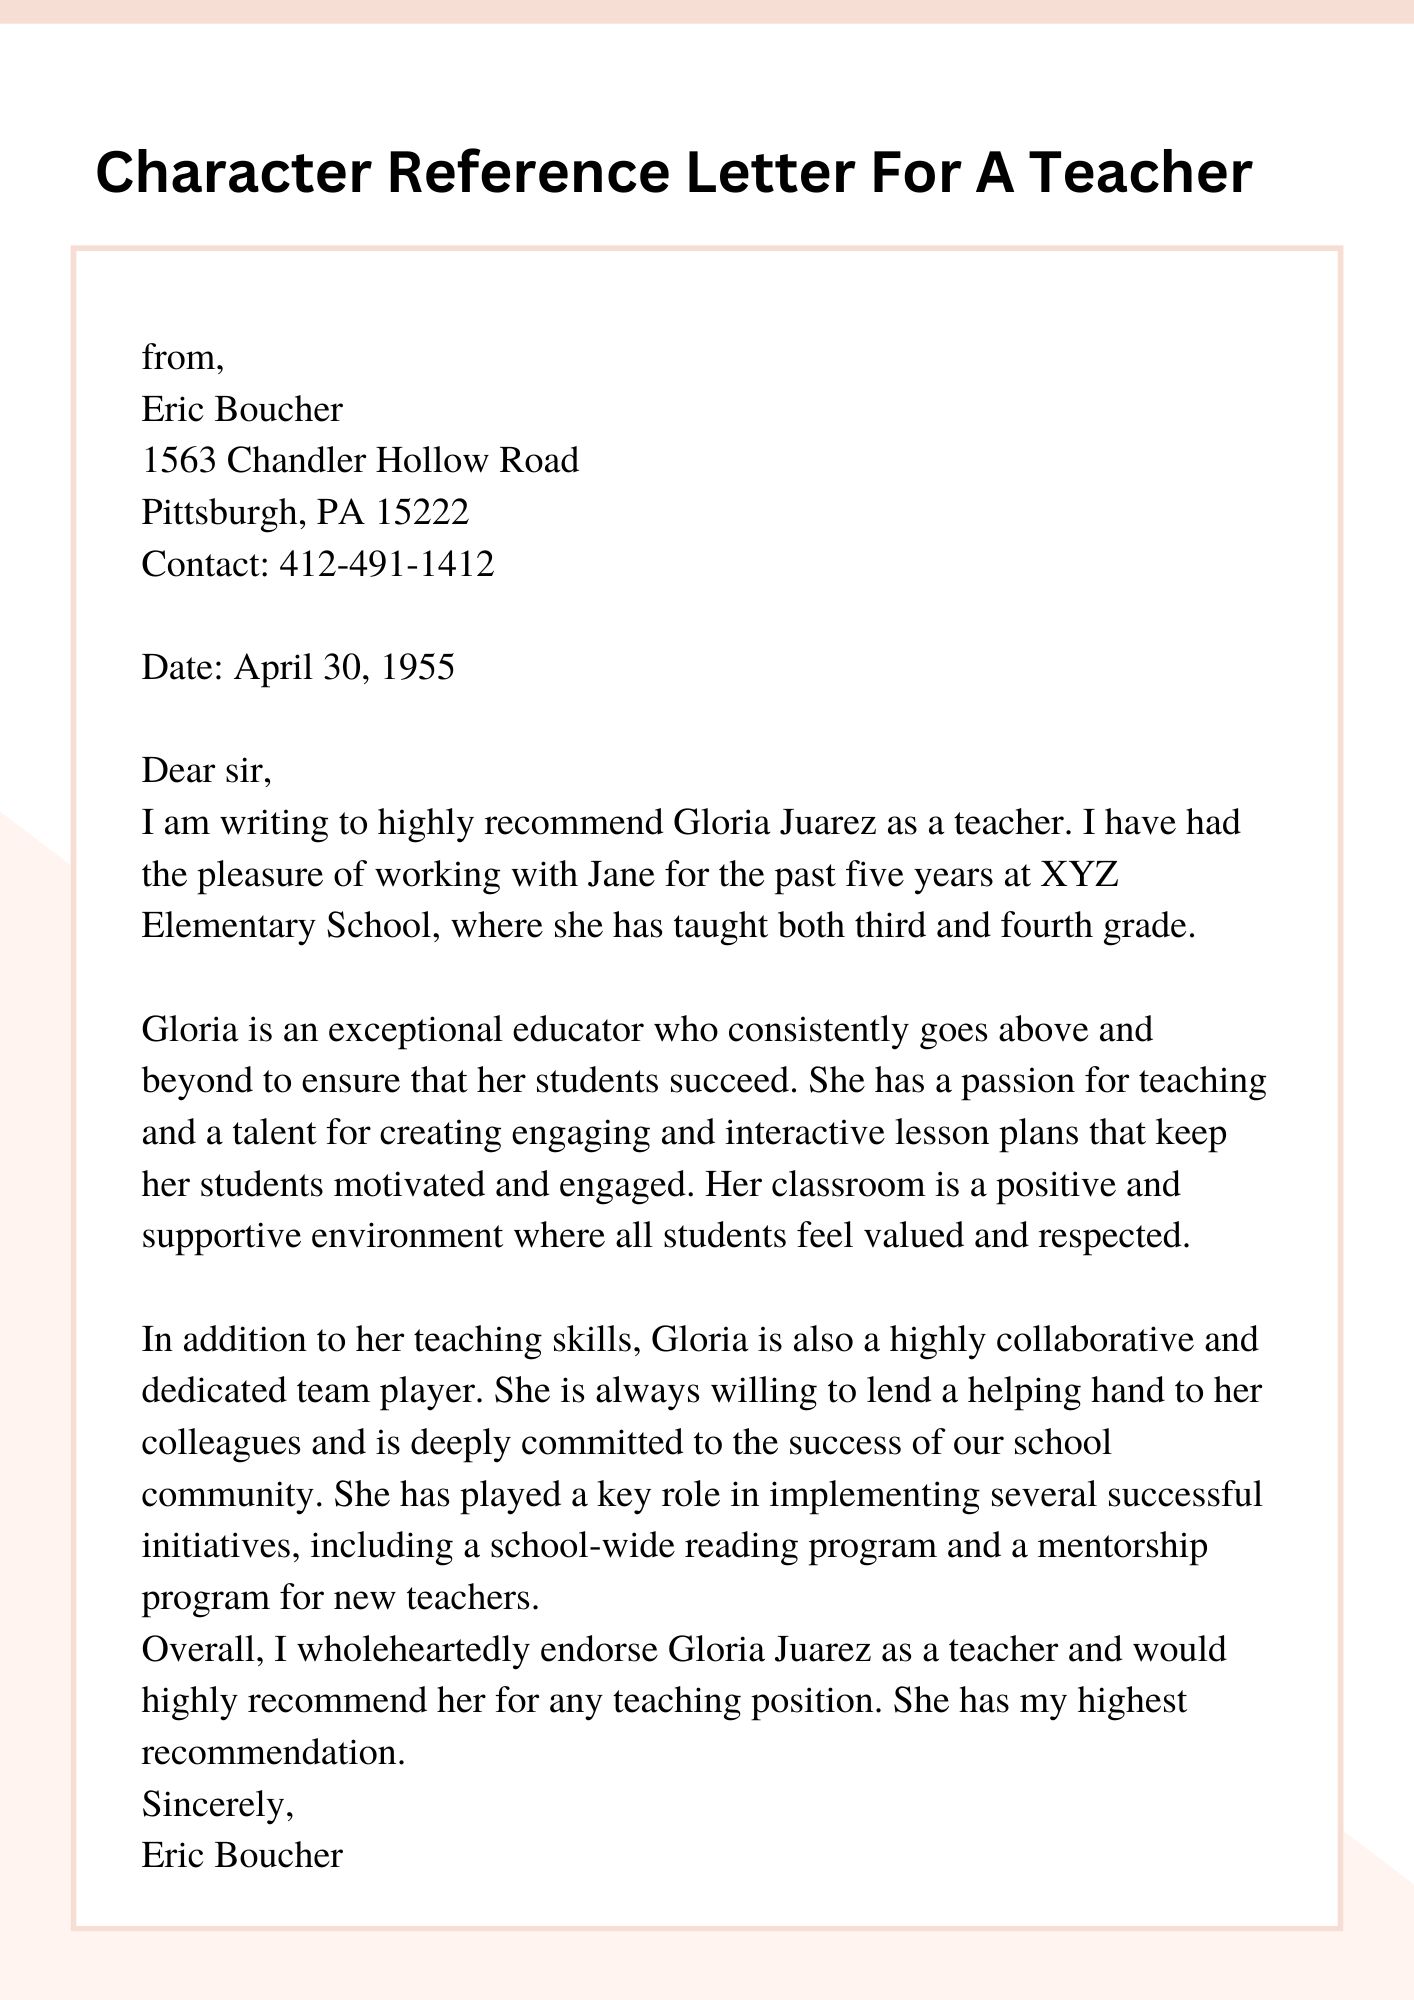 Character Reference Letter For A Teacher